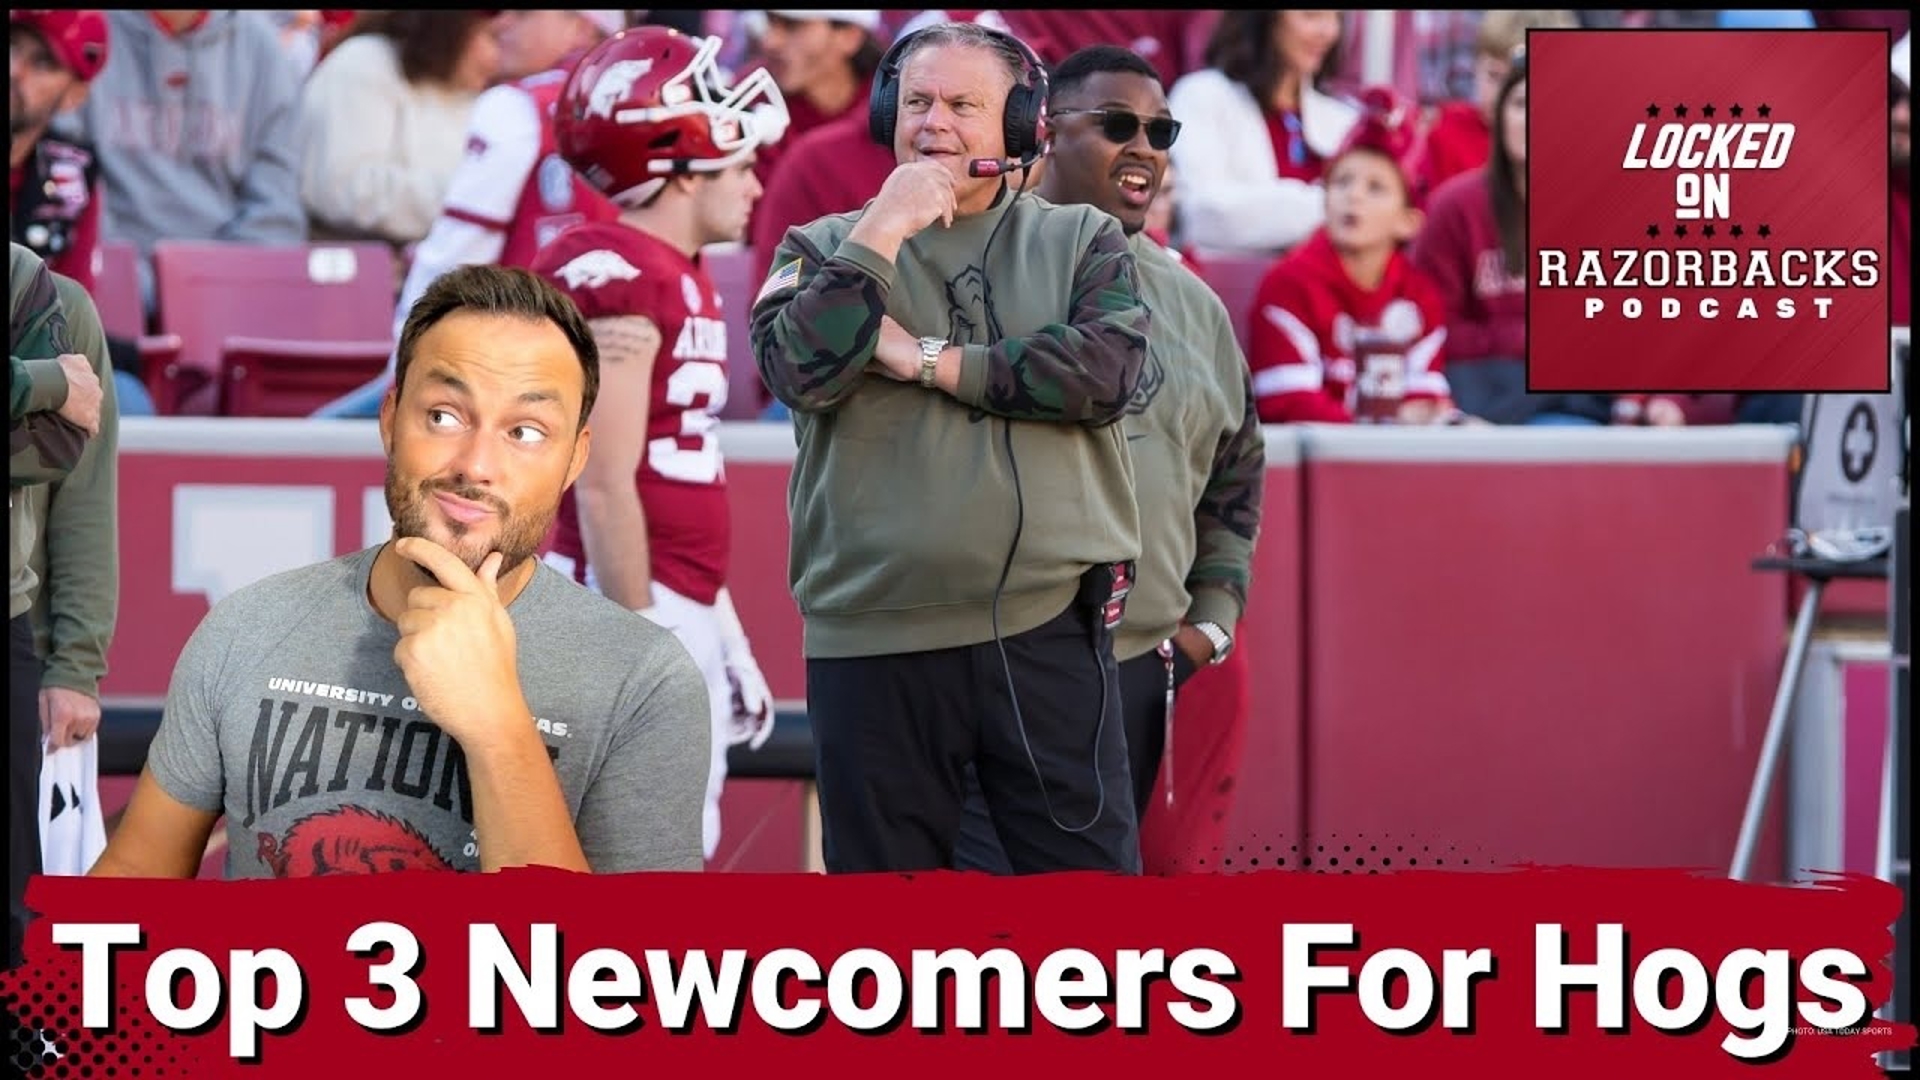 The transfer portal is part of college sports & it's not going away anytime soon. But who are the top 3 new guys on the Hogs that will make a difference in year one?